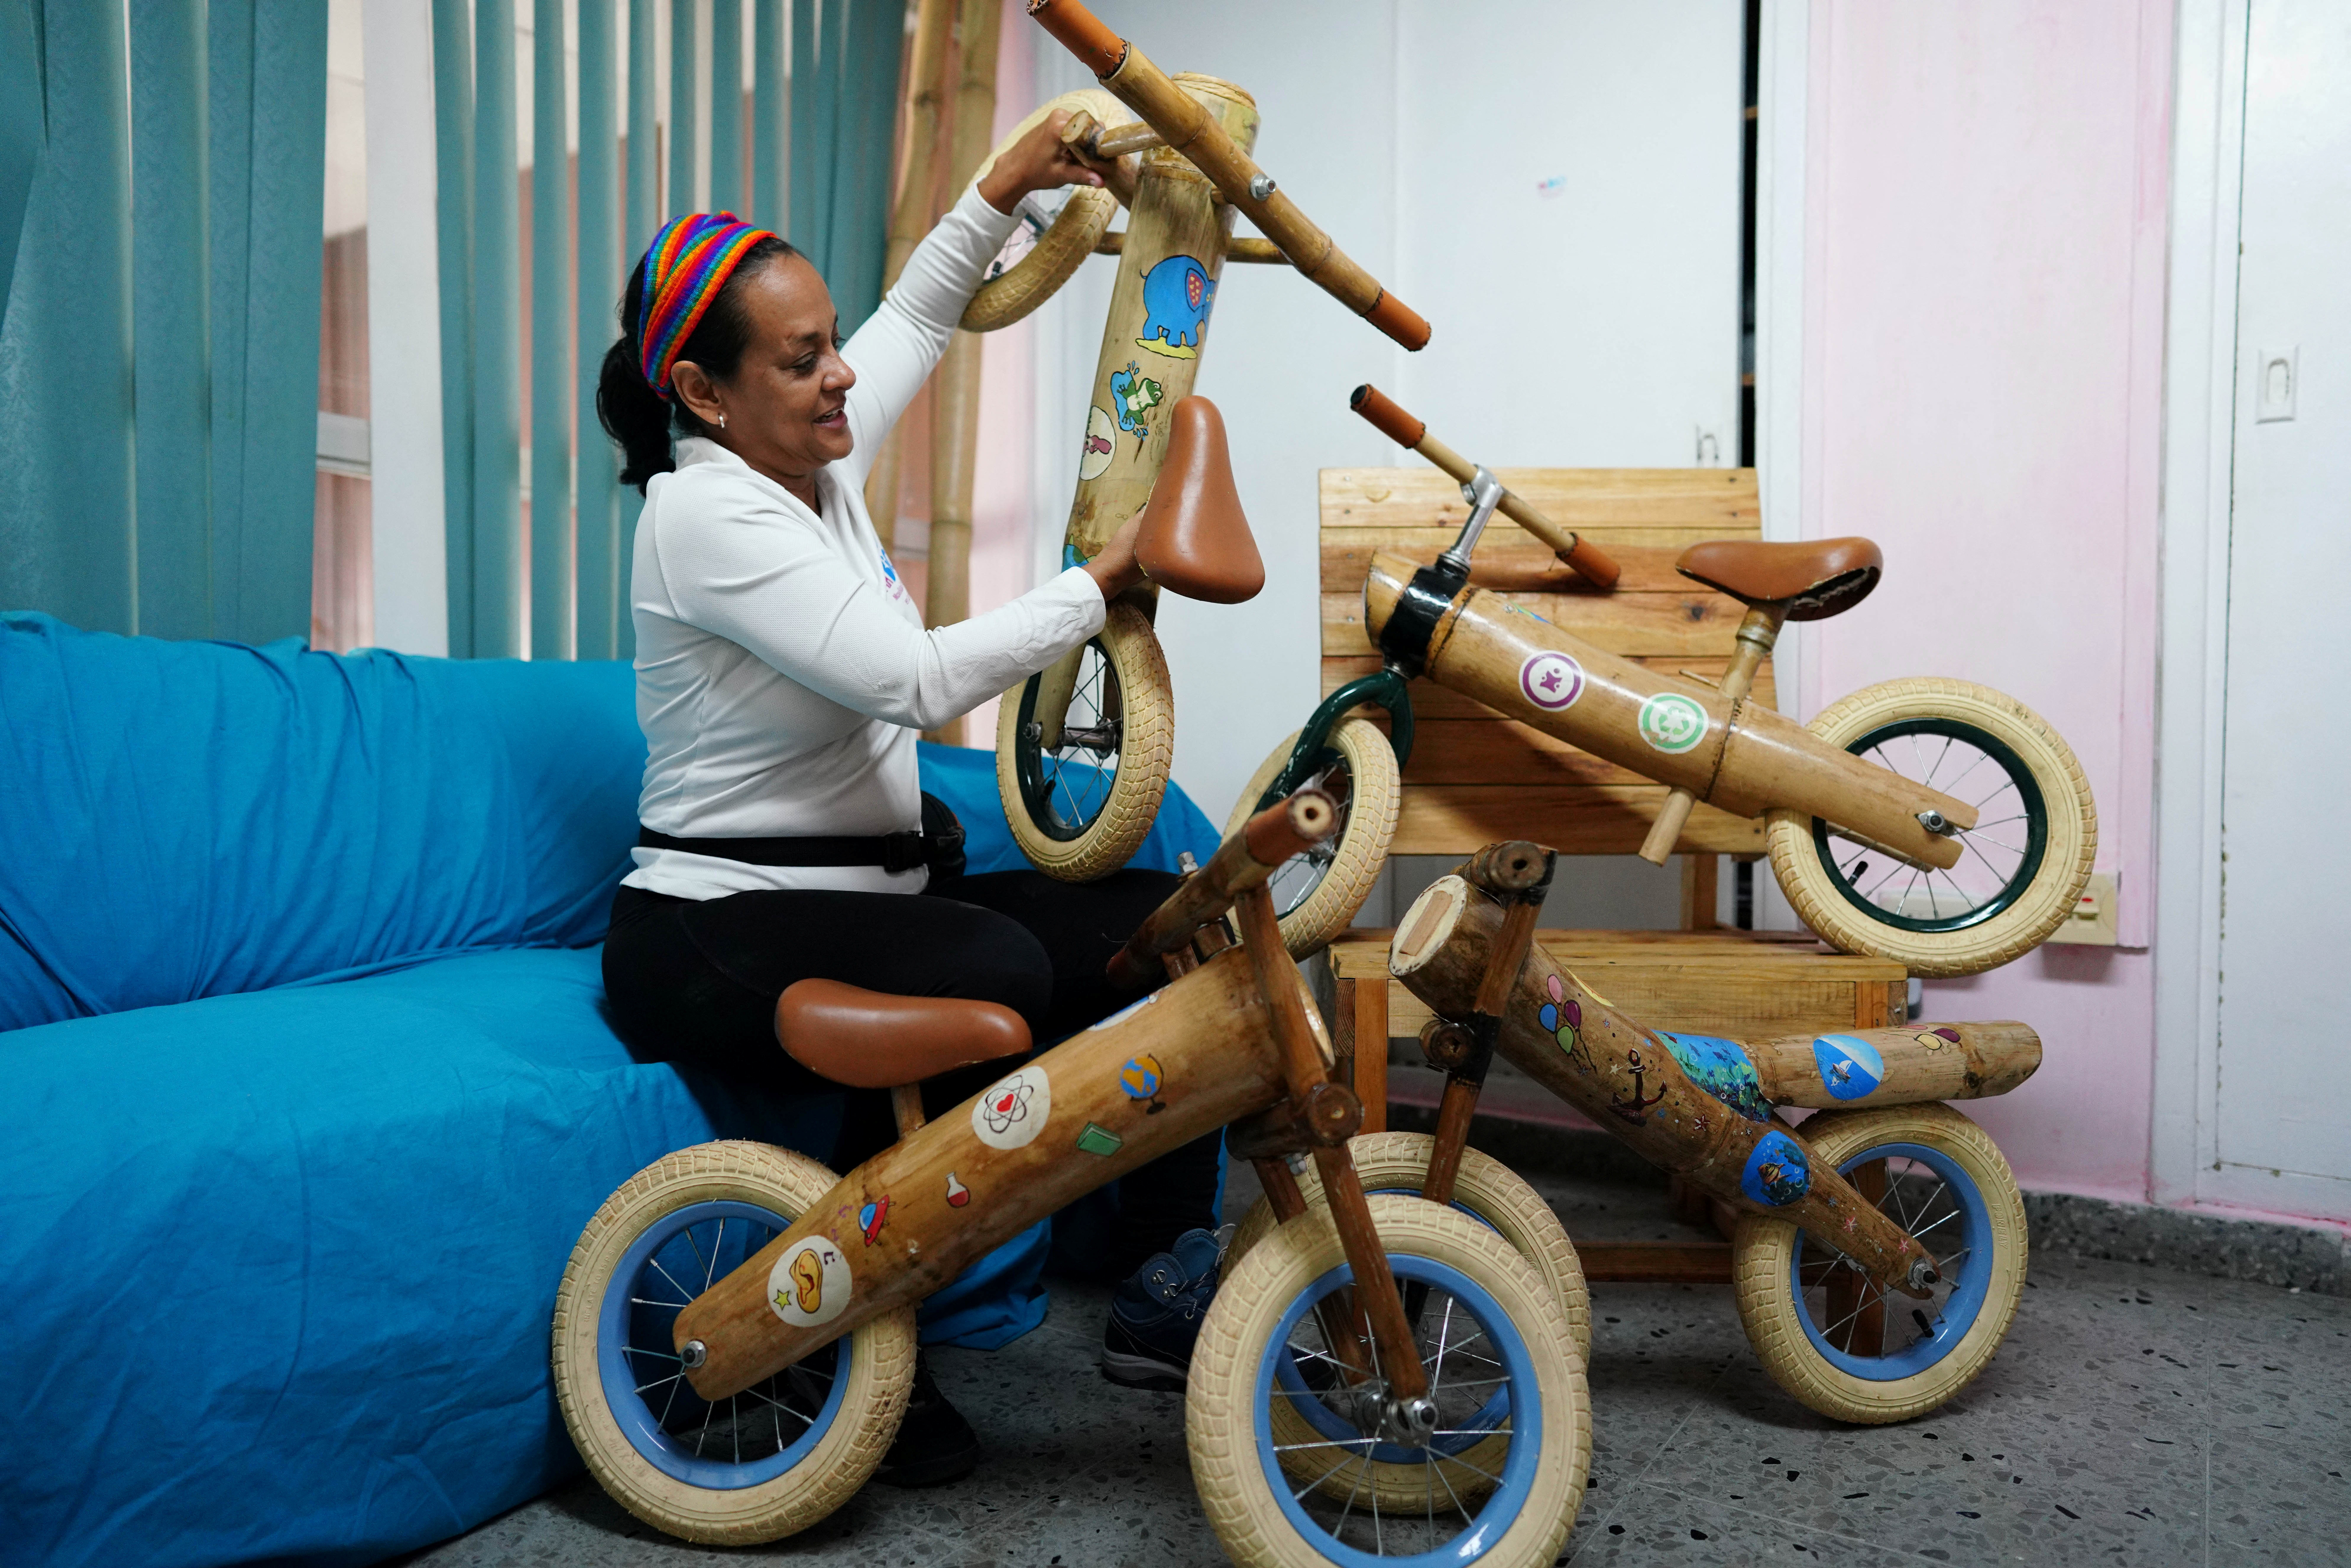 Cubans produce light, eco-friendly bamboo bicycles at small workshop